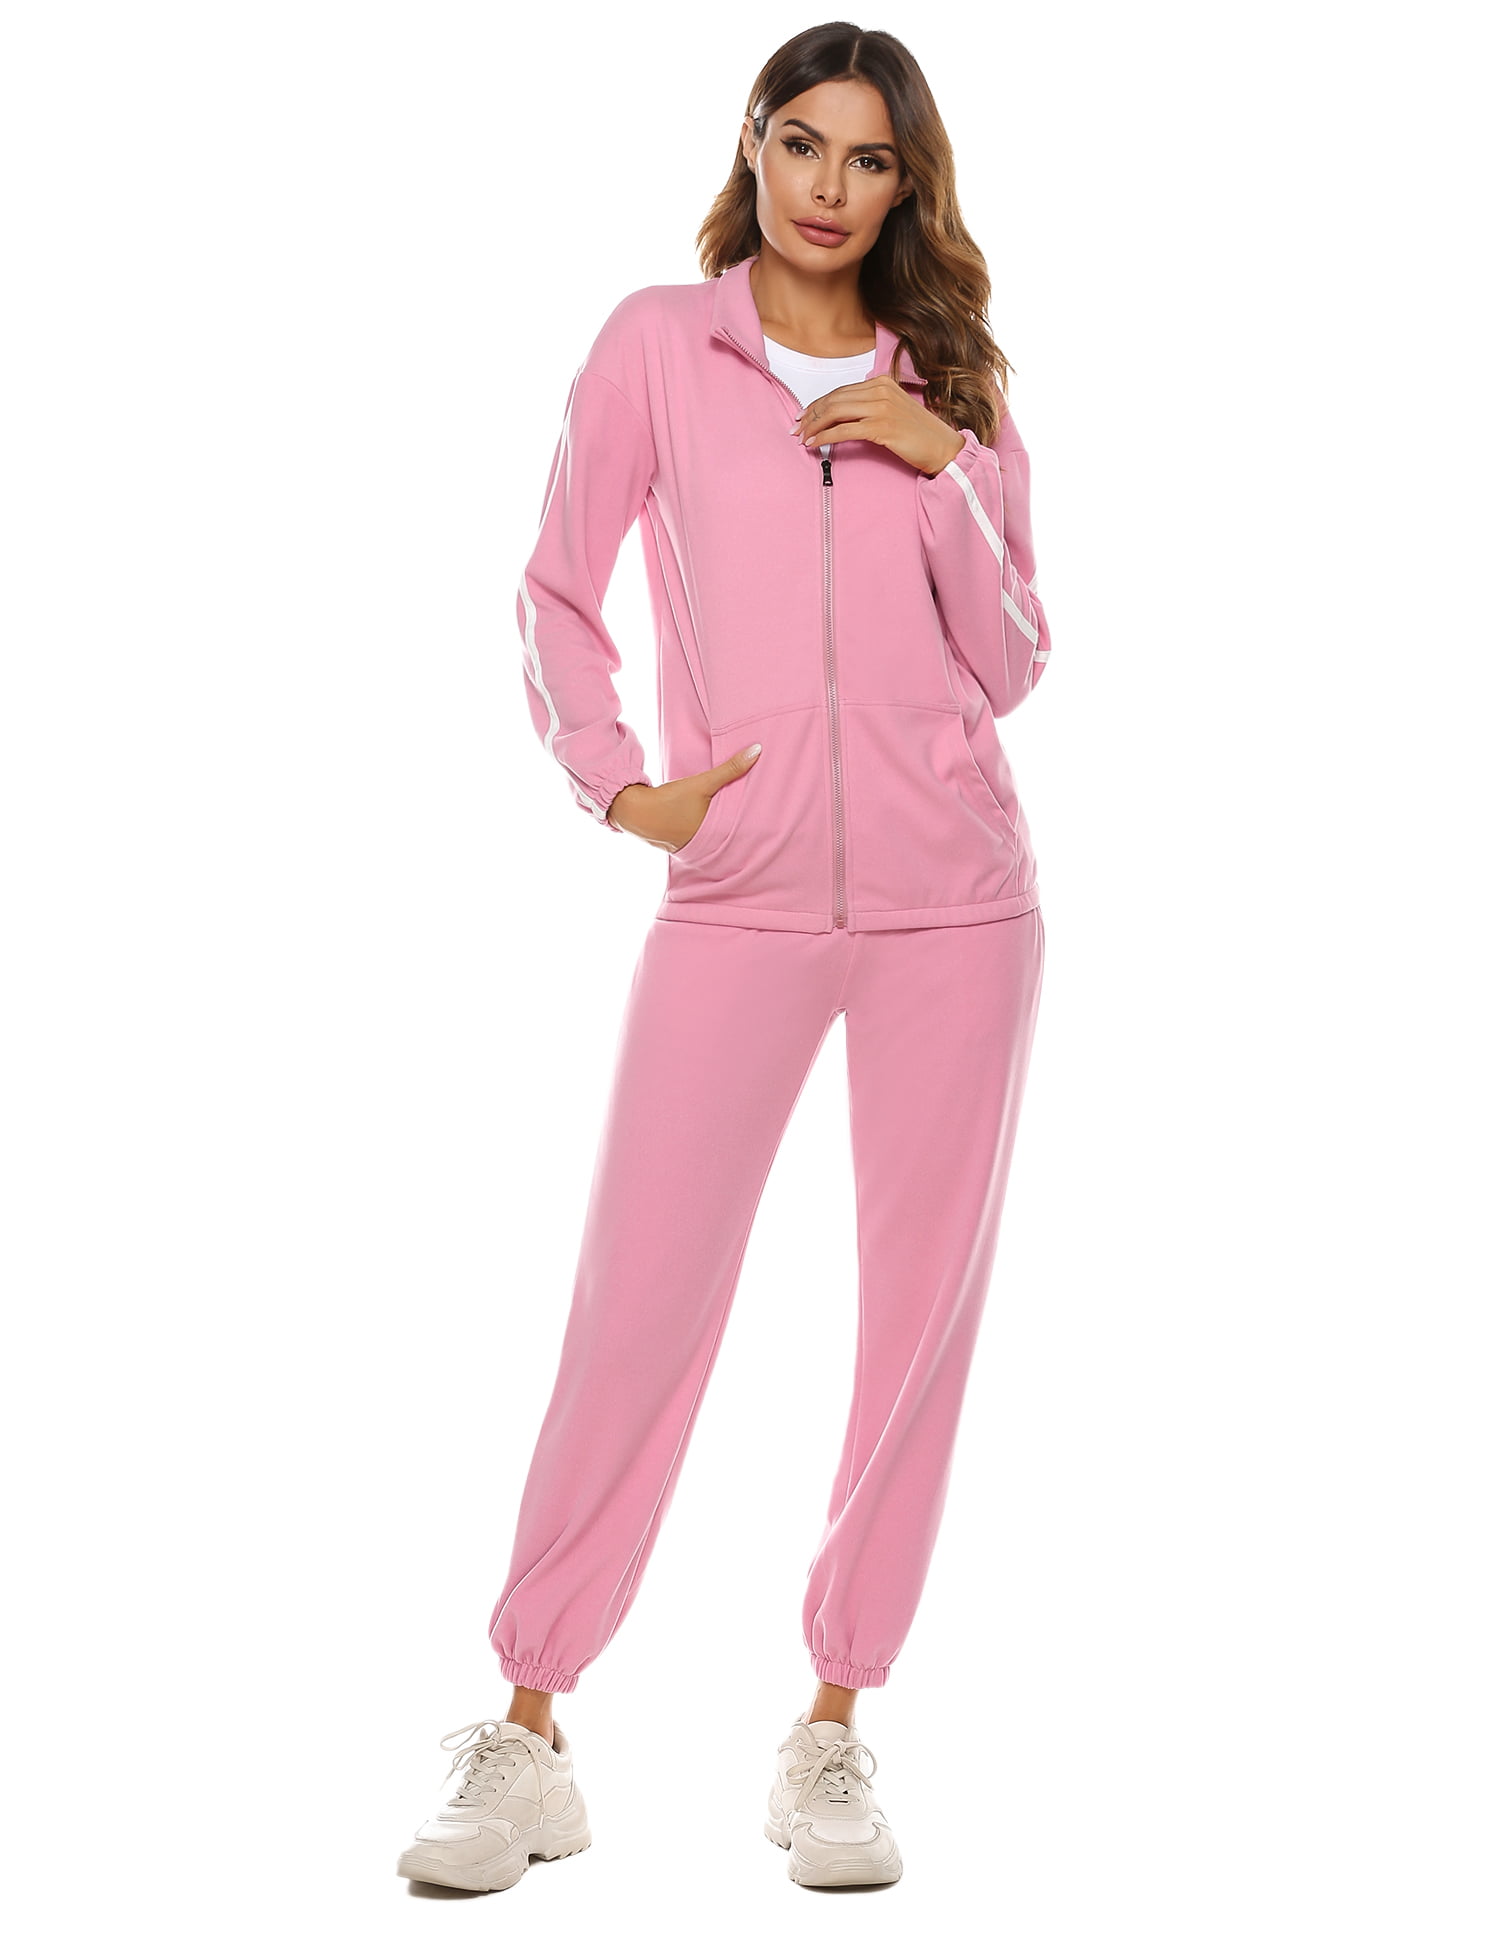 Akalnny Women Casual Basic Velour Sweatsuit Set Zip Up Hoodies and Pants Sports Suits Tracksuits